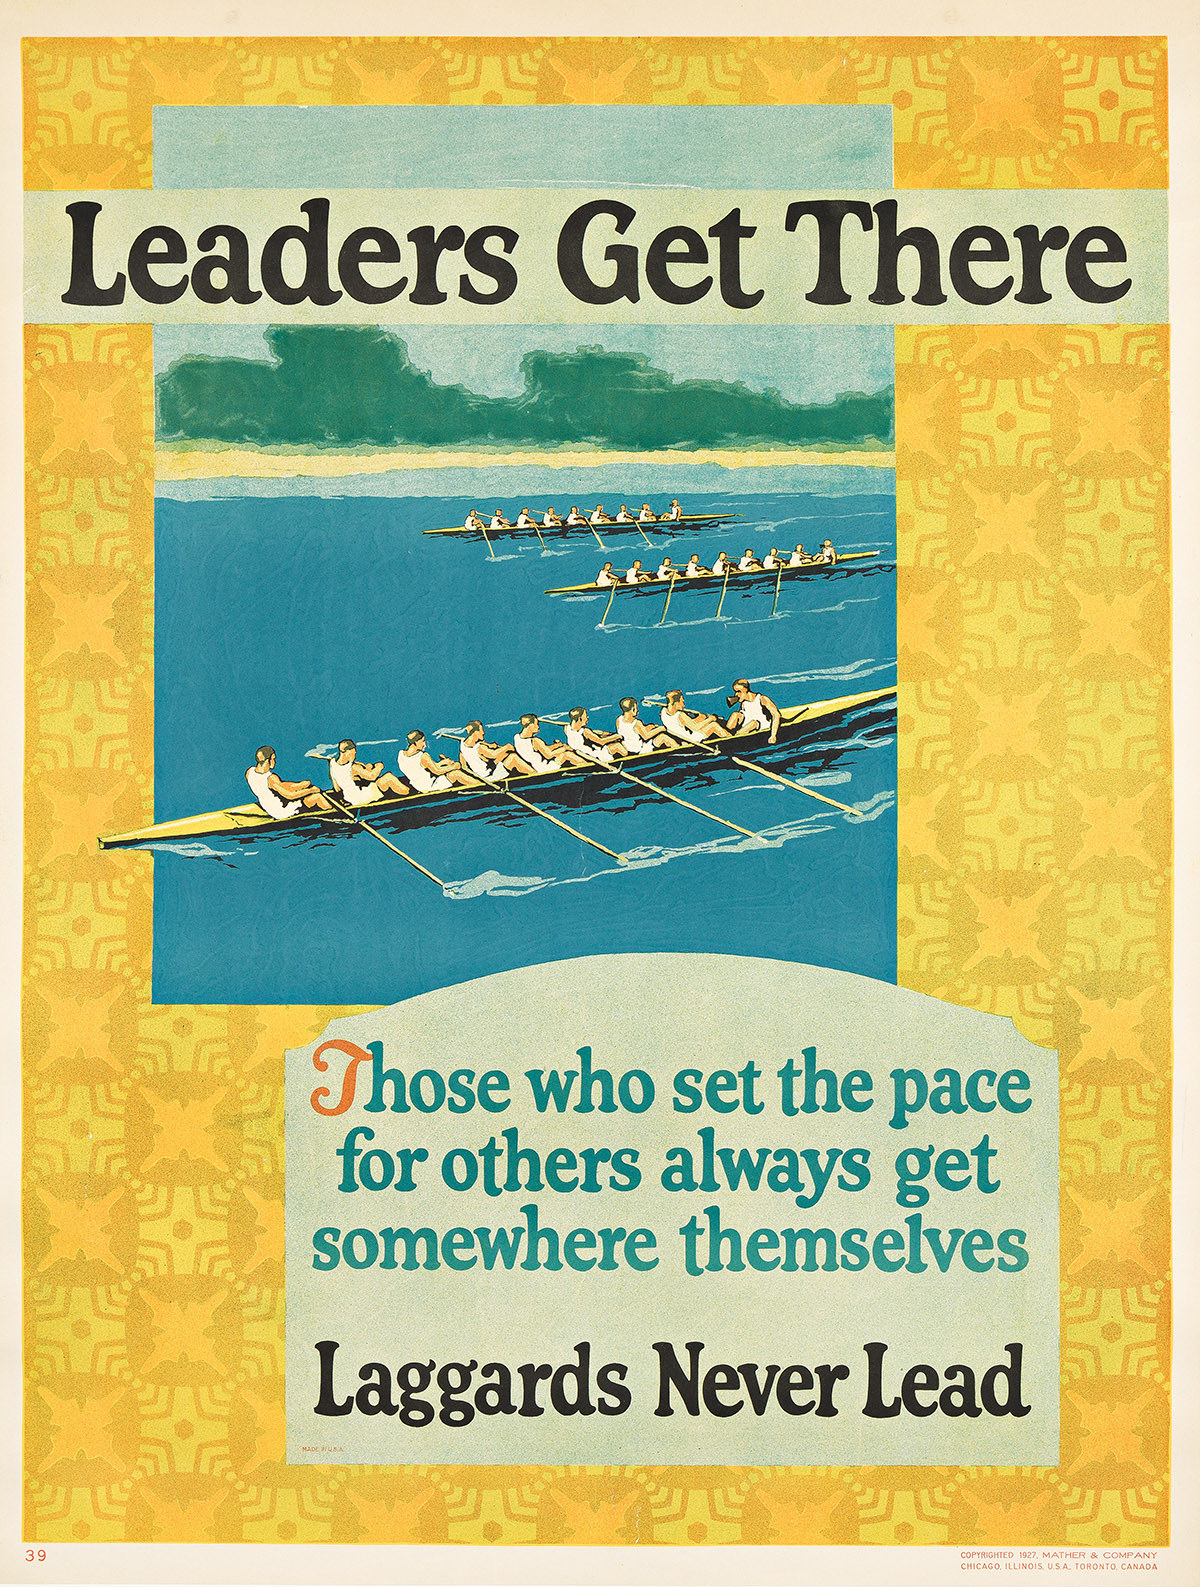 DESIGNER UNKNOWN. LEADERS GET THERE / LAGGARDS NEVER LEAD. 1927. 46¾x35½ inches, 118¾x90¼ cm. Mather & Company, Chicago.